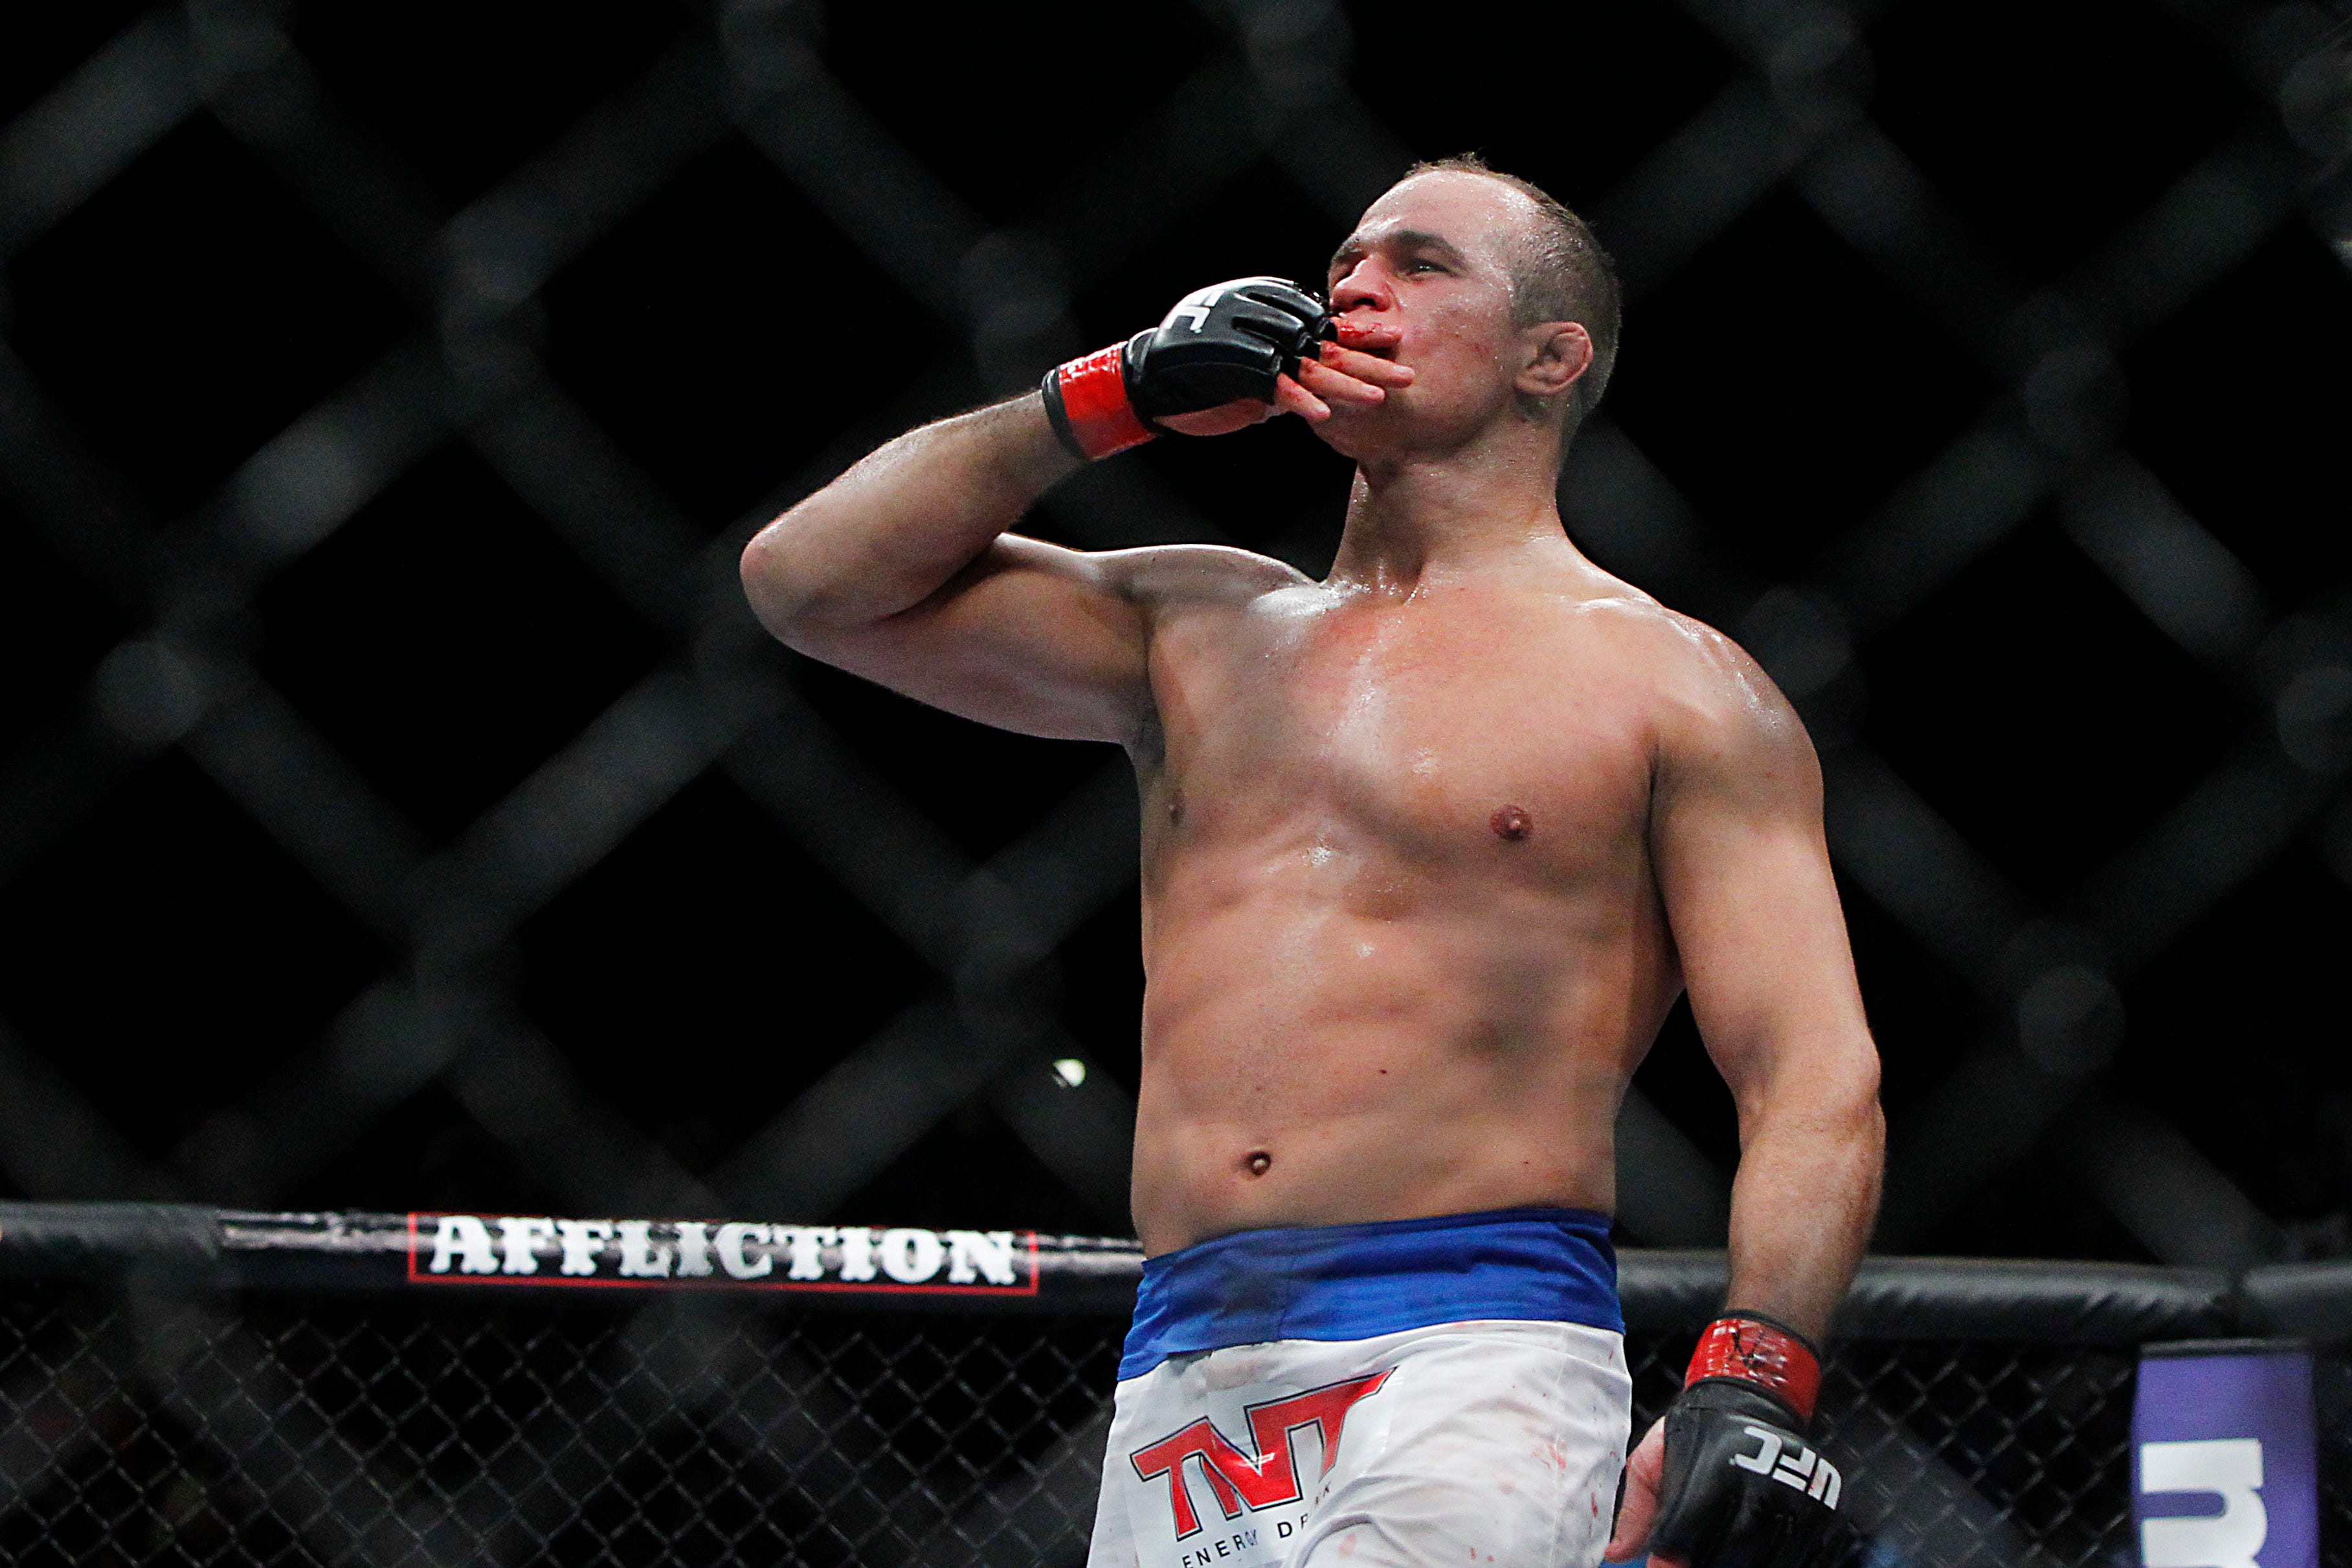 UFC parts ways with former heavyweight champ, top contender